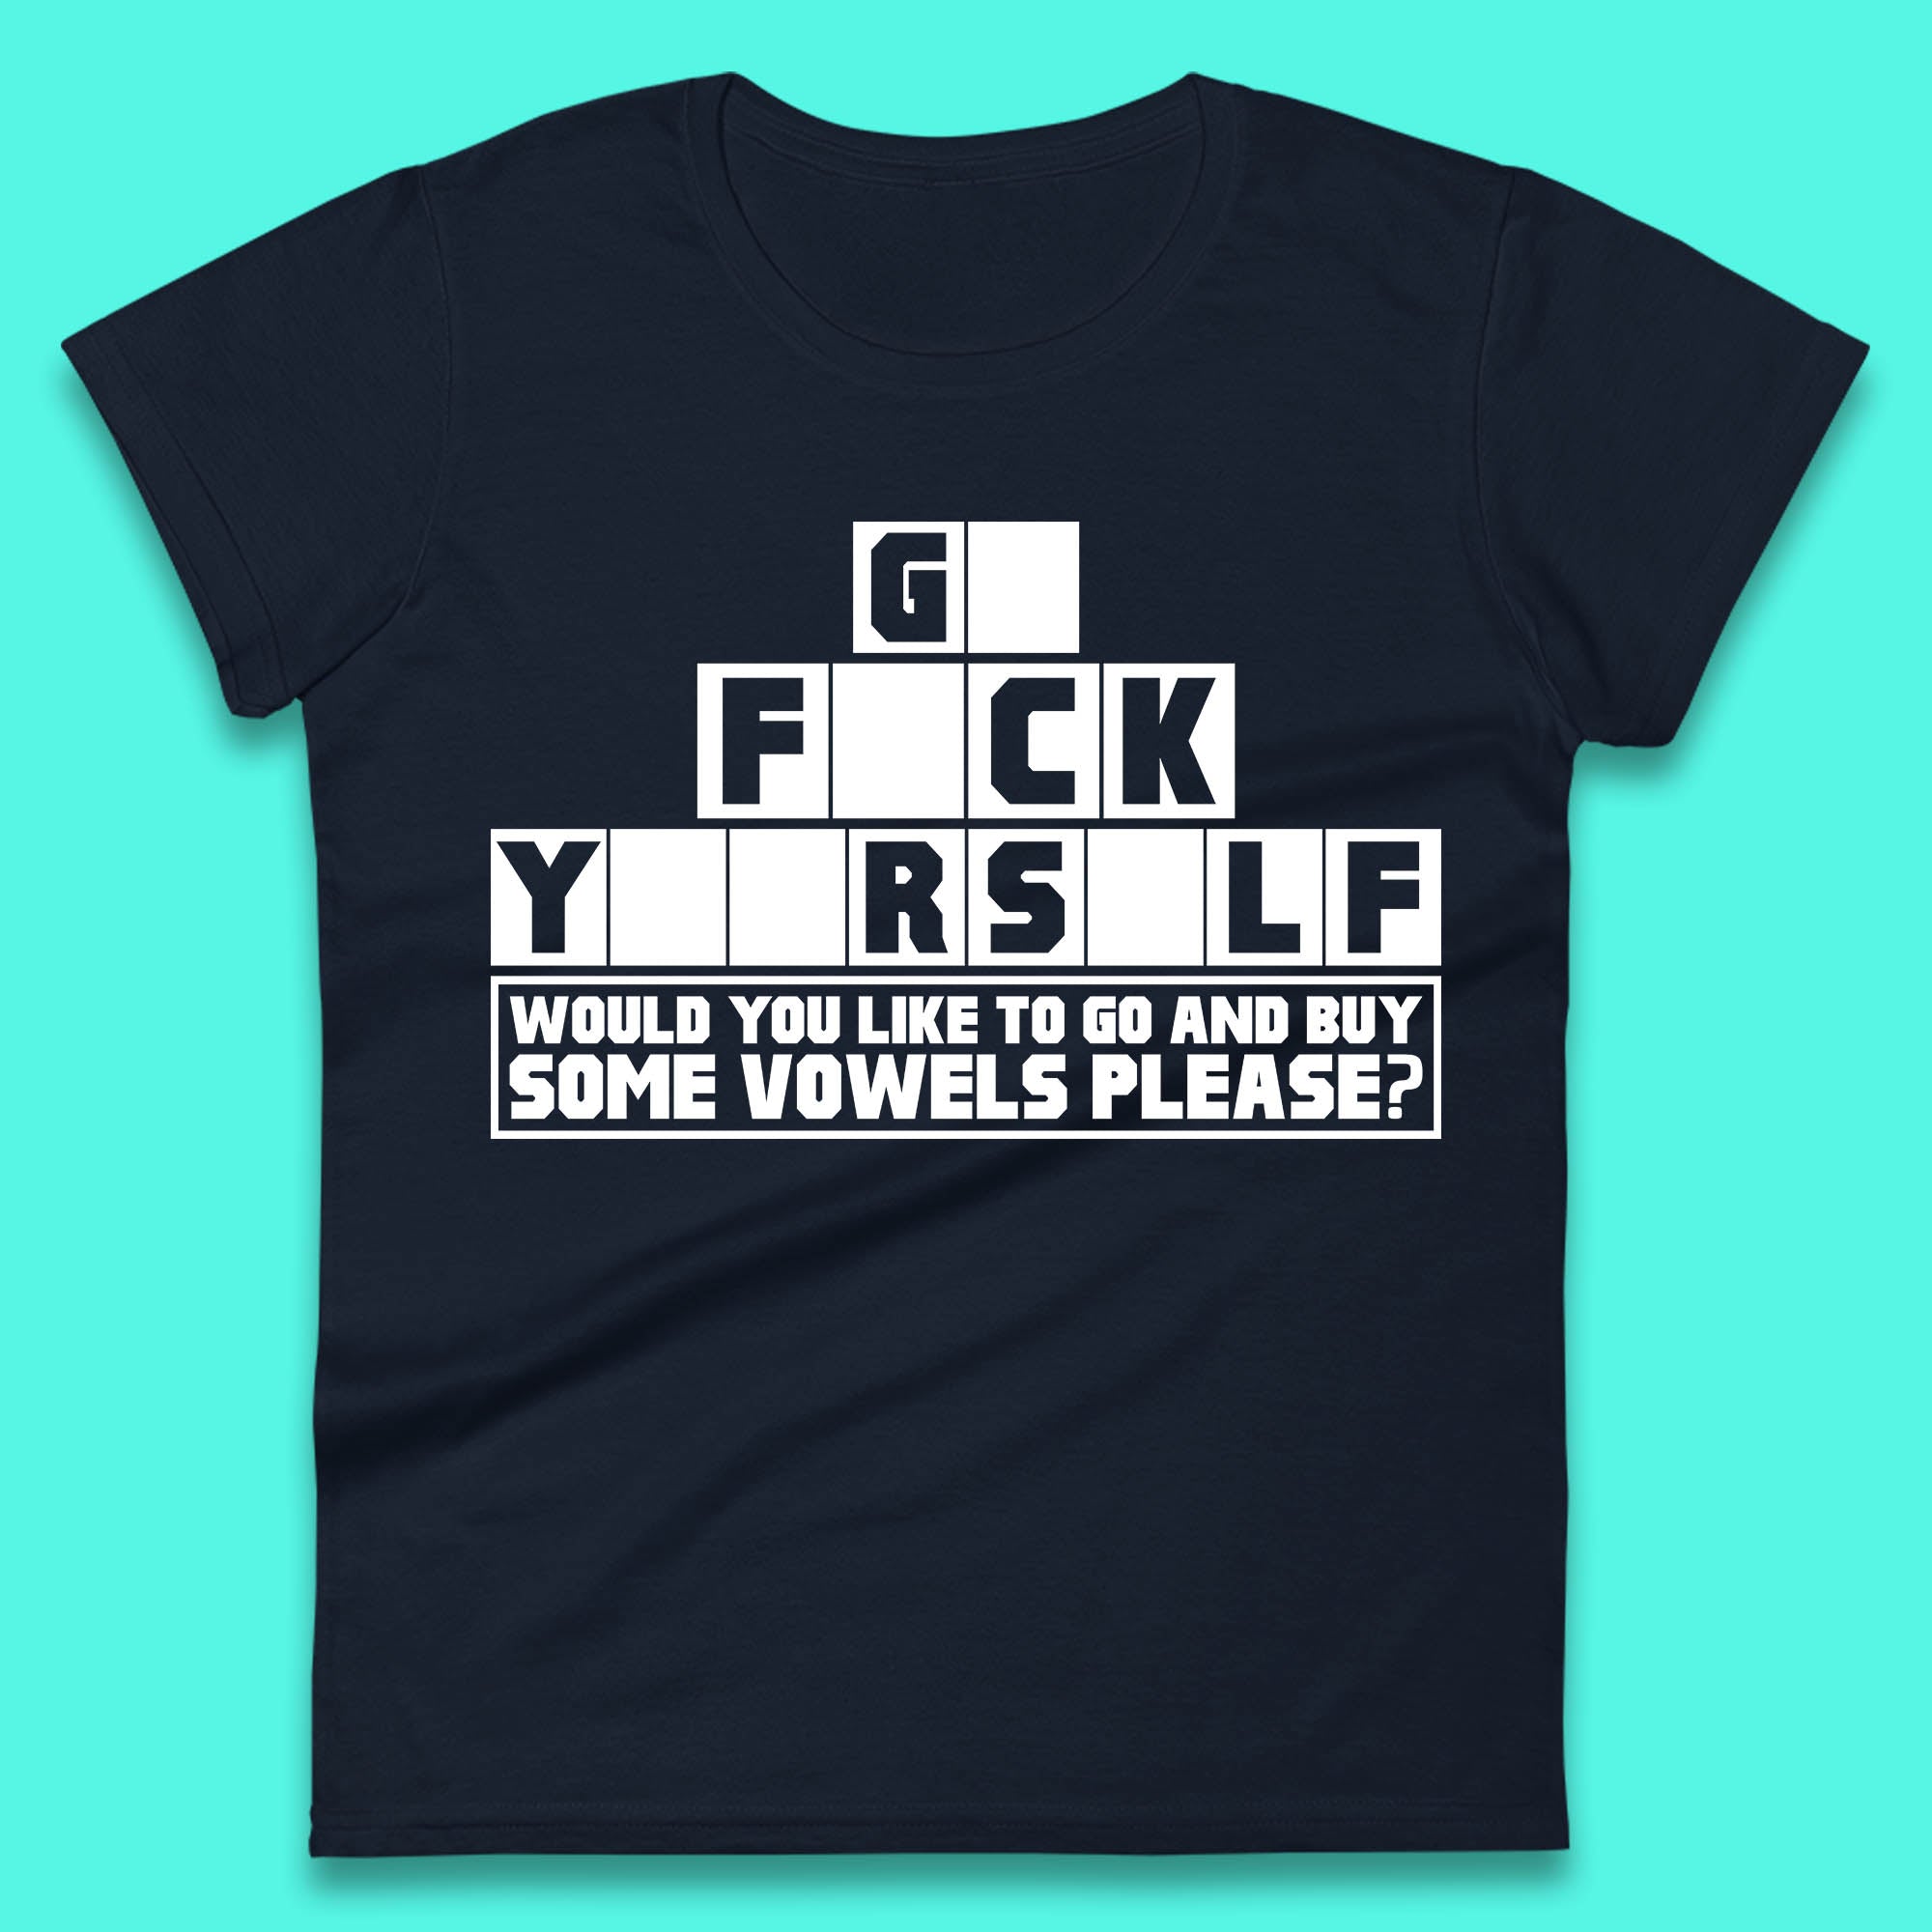 Go F*ck Yourself Would You Like To Go And Buy Some Vowels Please? Funny Rude Sarcastic Offensive Gift Womens Tee Top